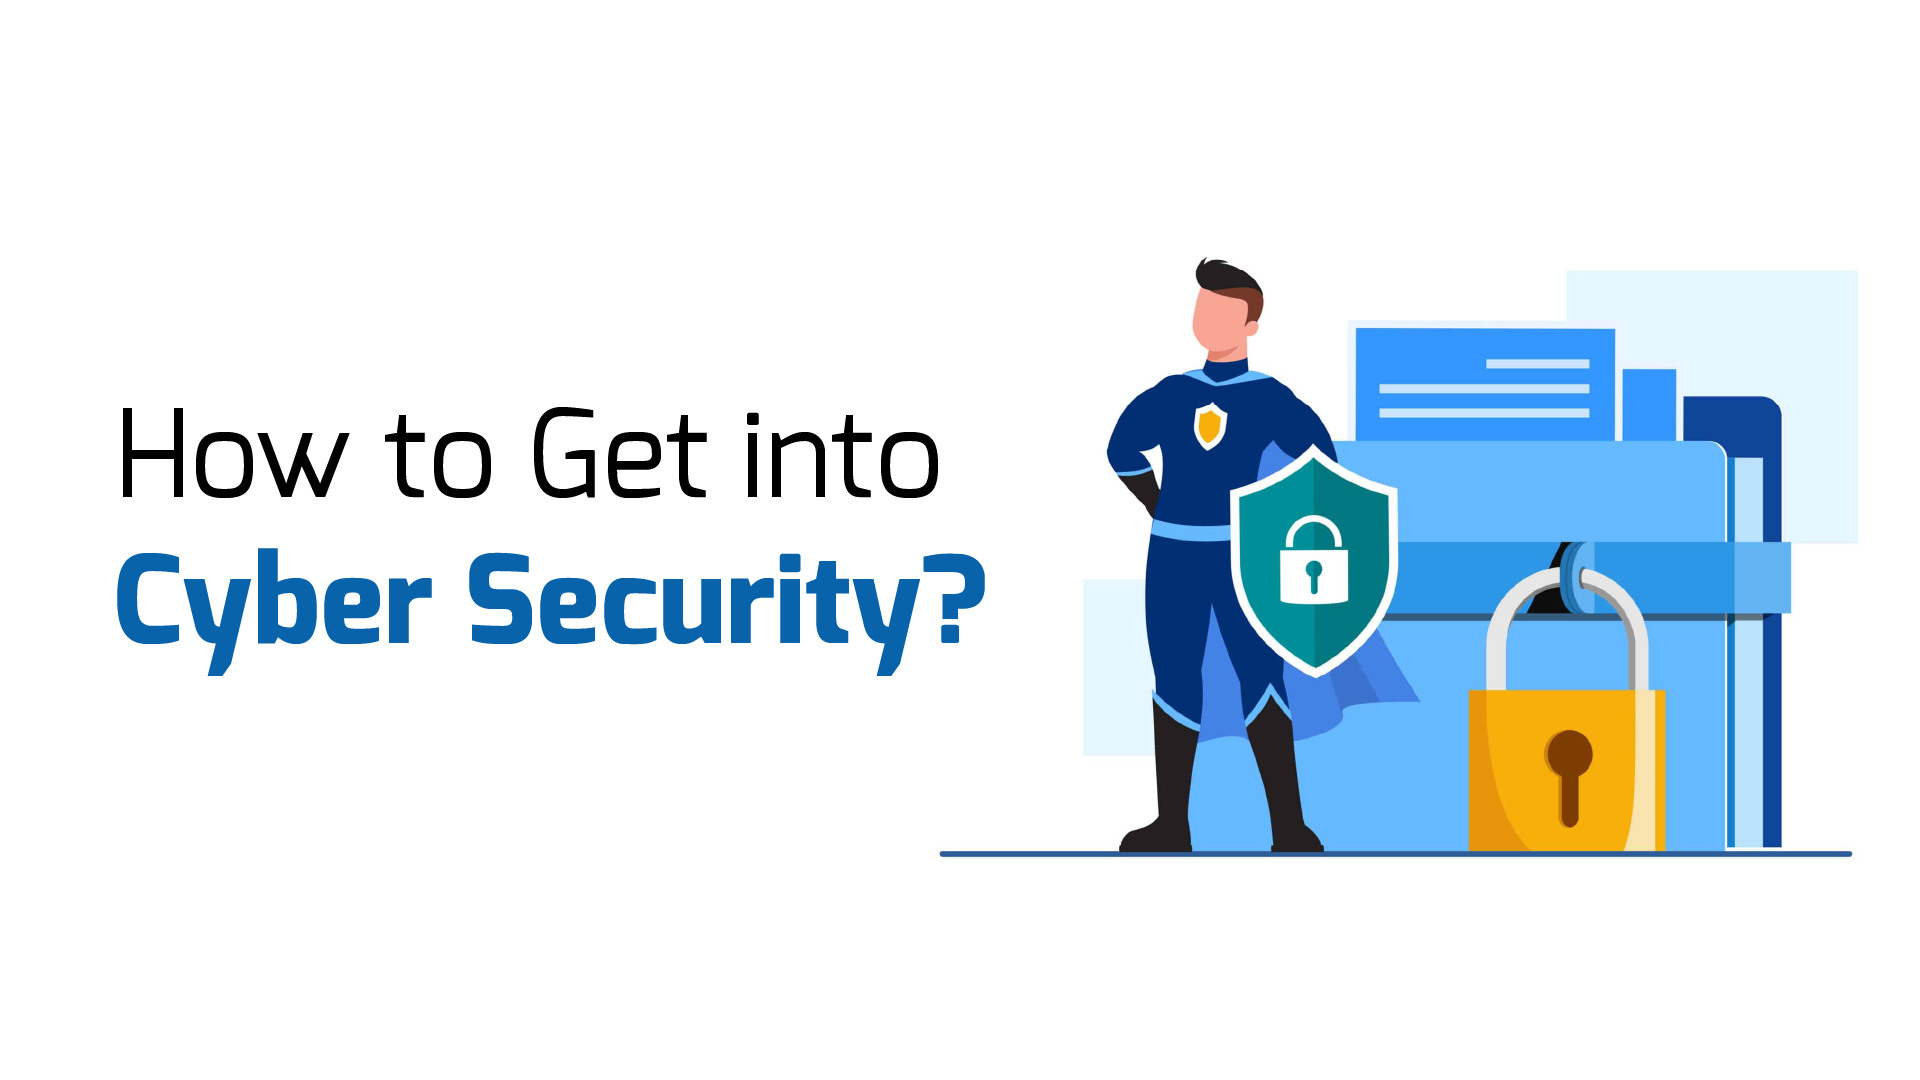 How to Get into Cyber Security?